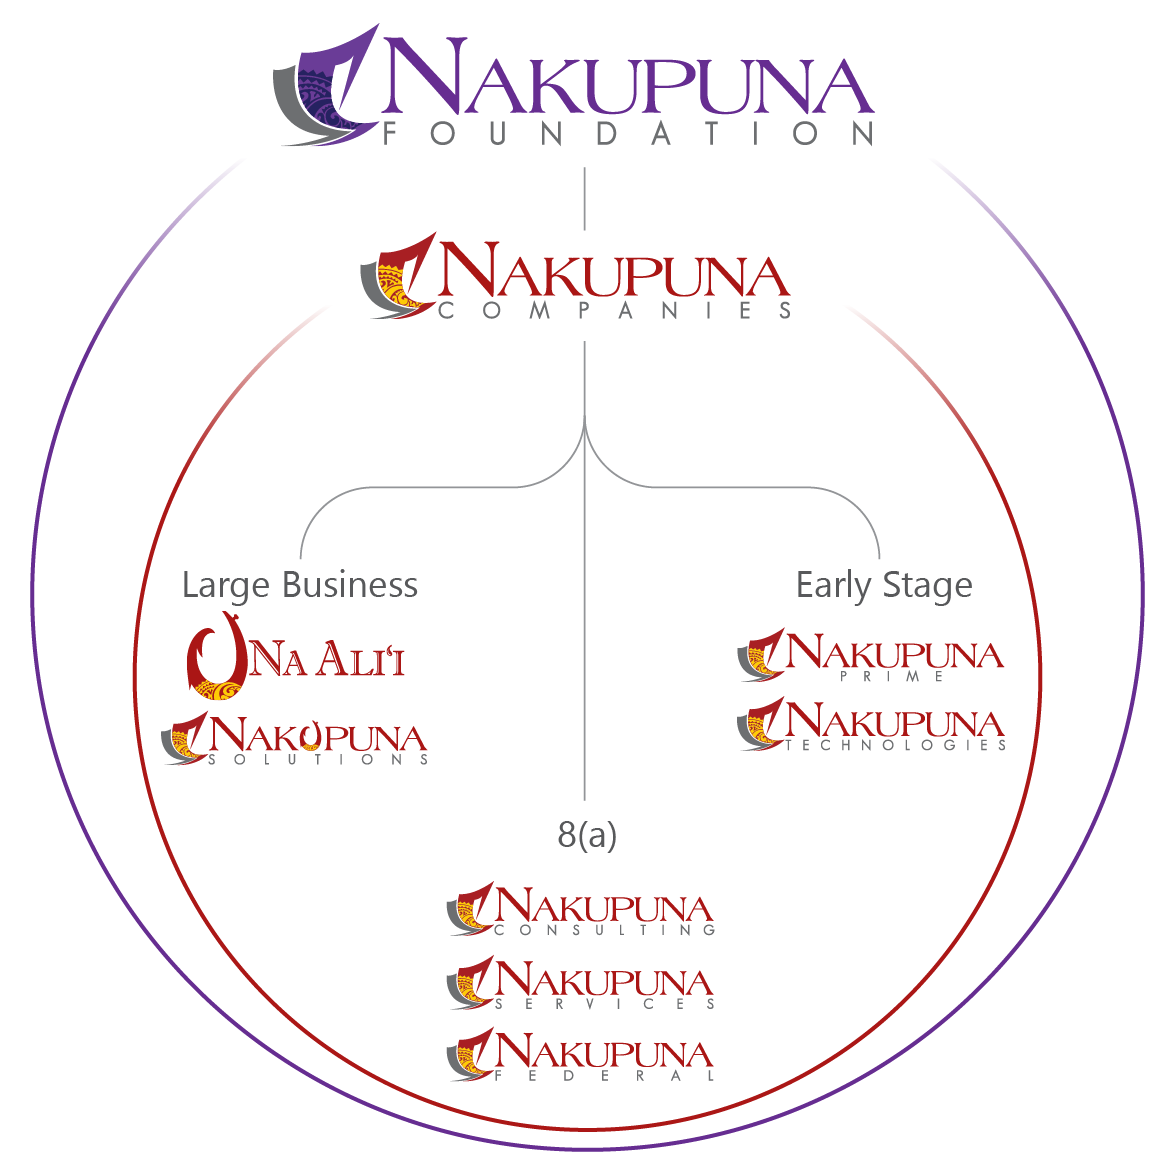 Organization structure image showing the nakupuna family of companies.